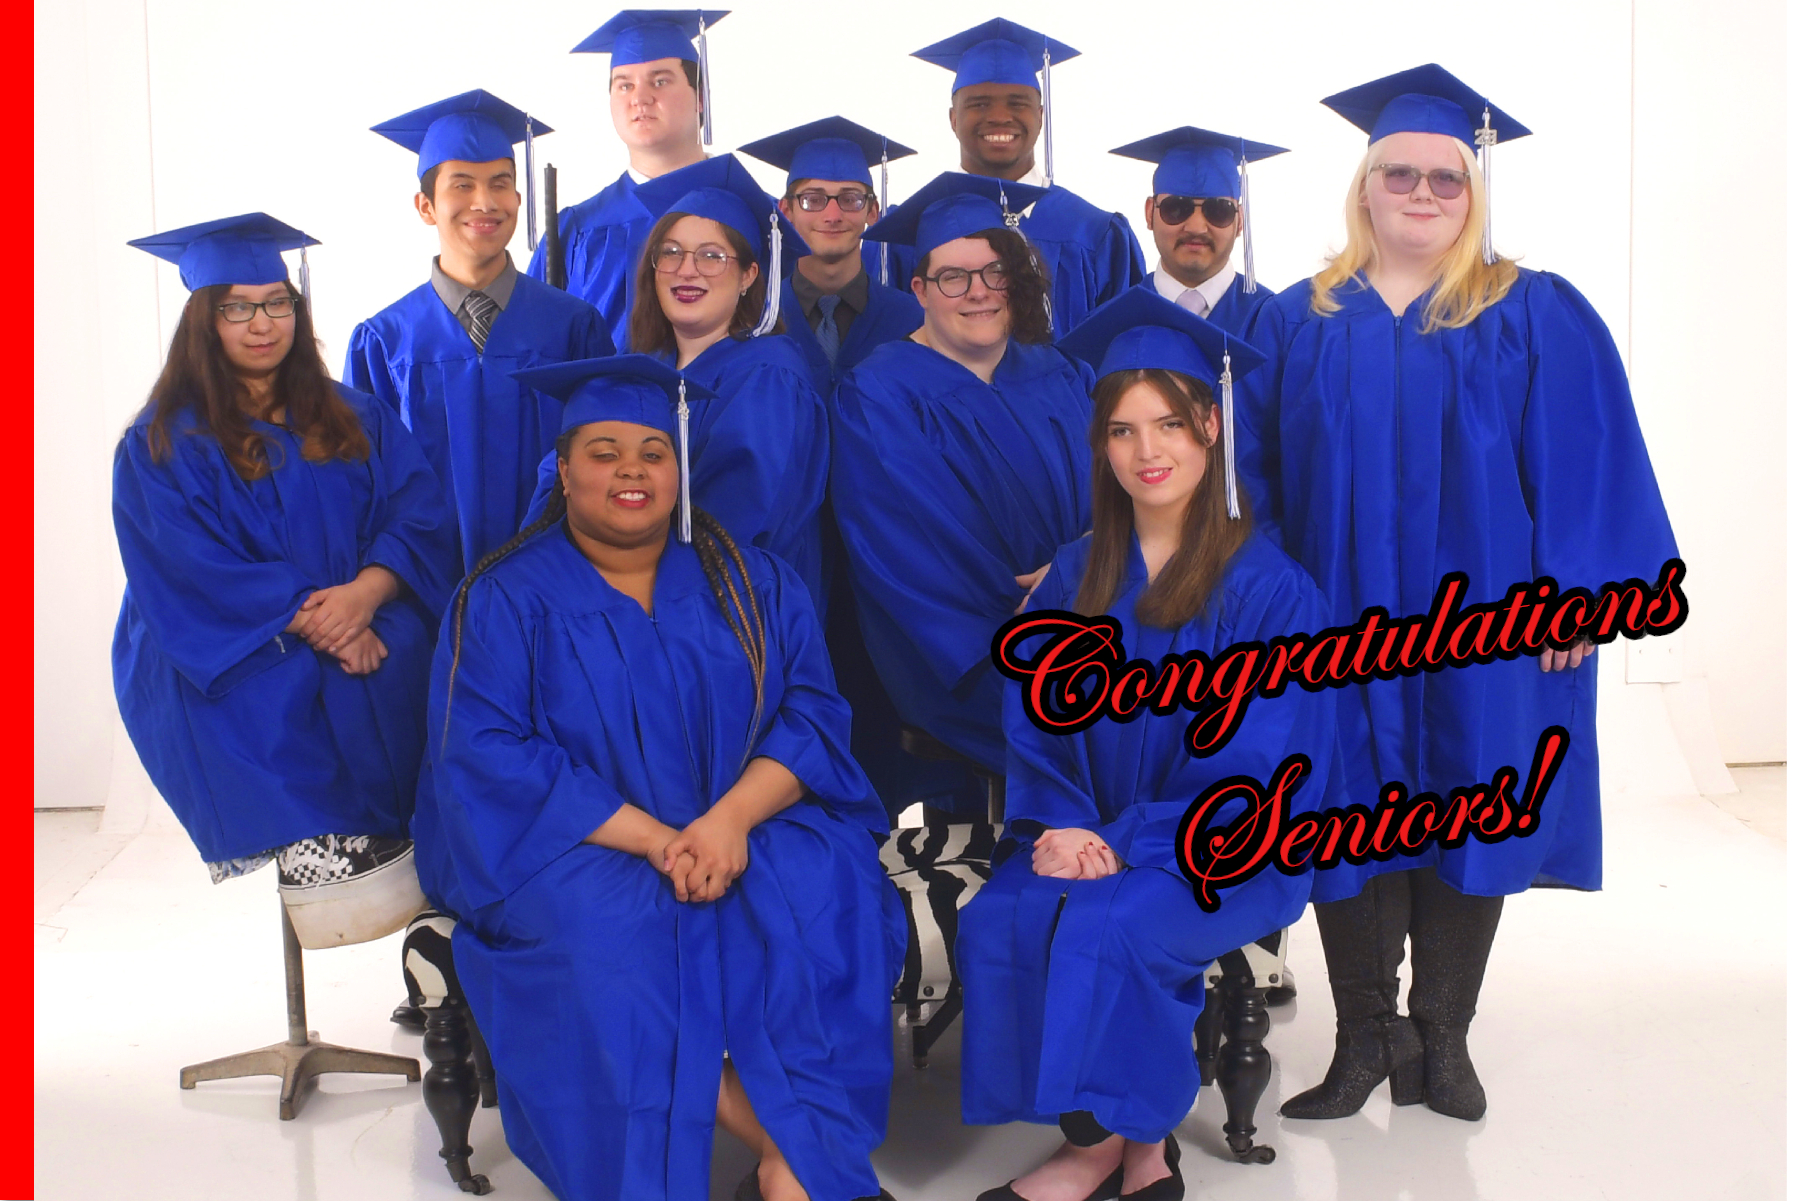 Group of senior students in blue cap in gown standing together